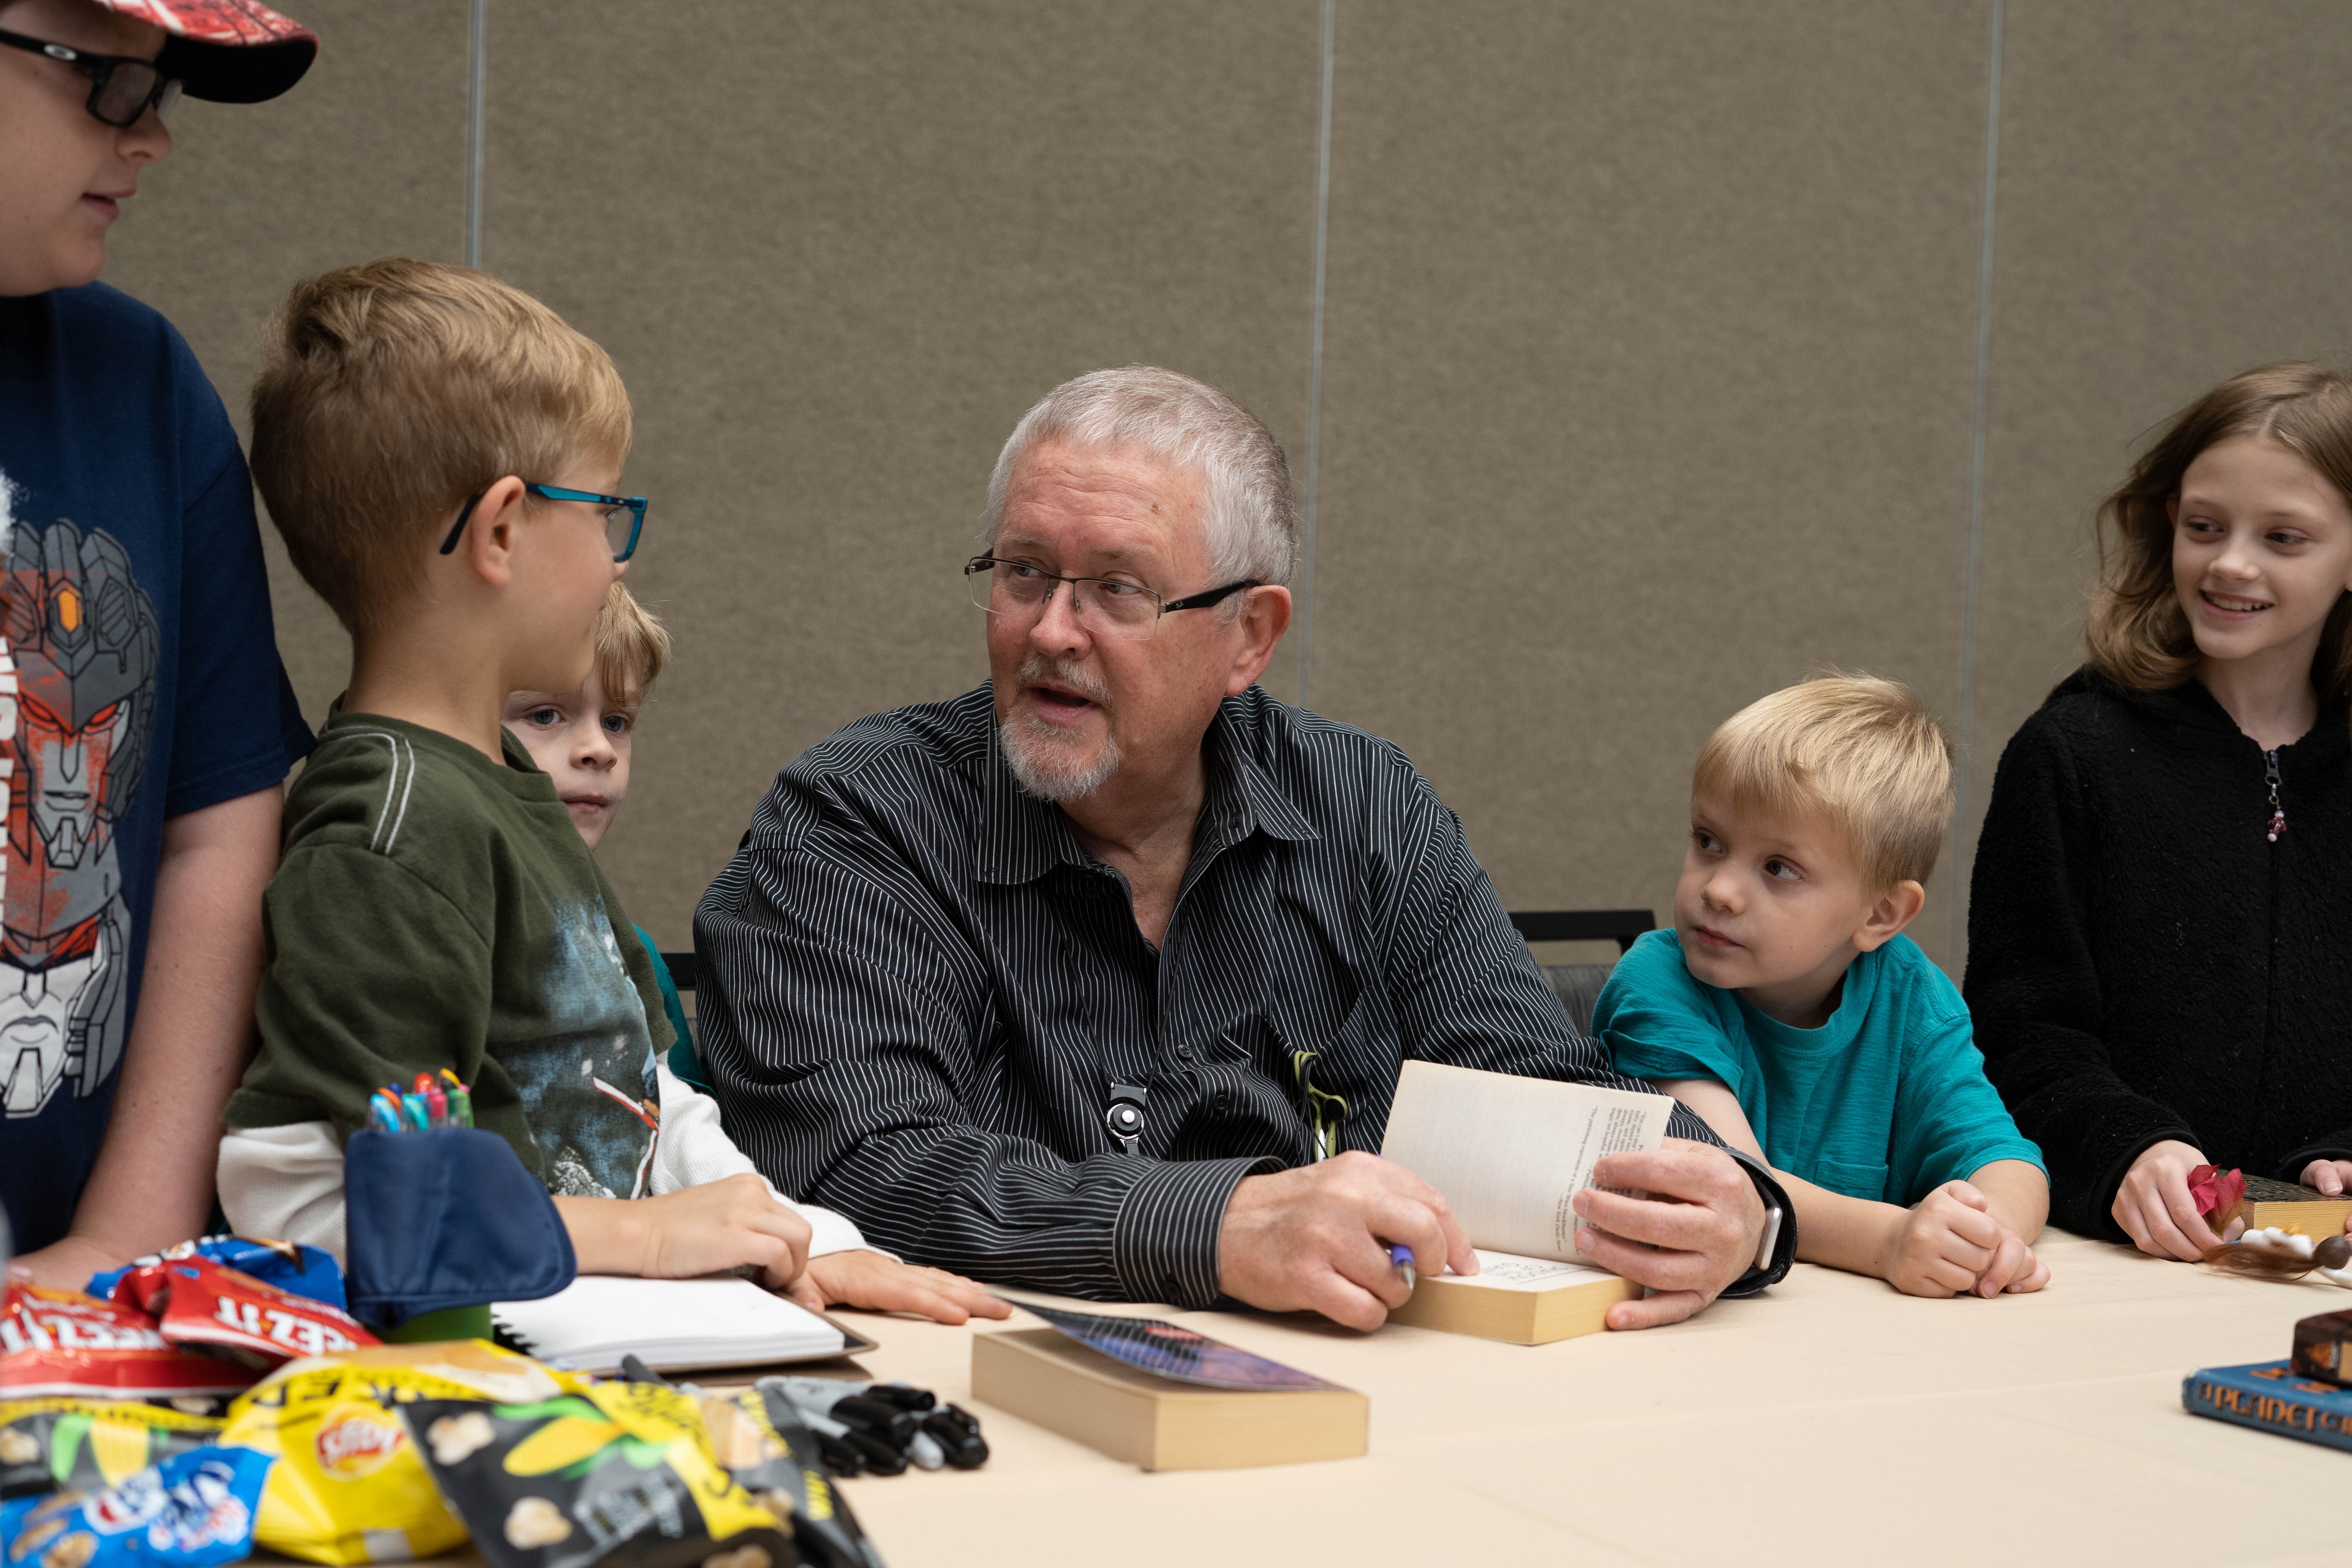 Orson Scott Card talking to children at book signing